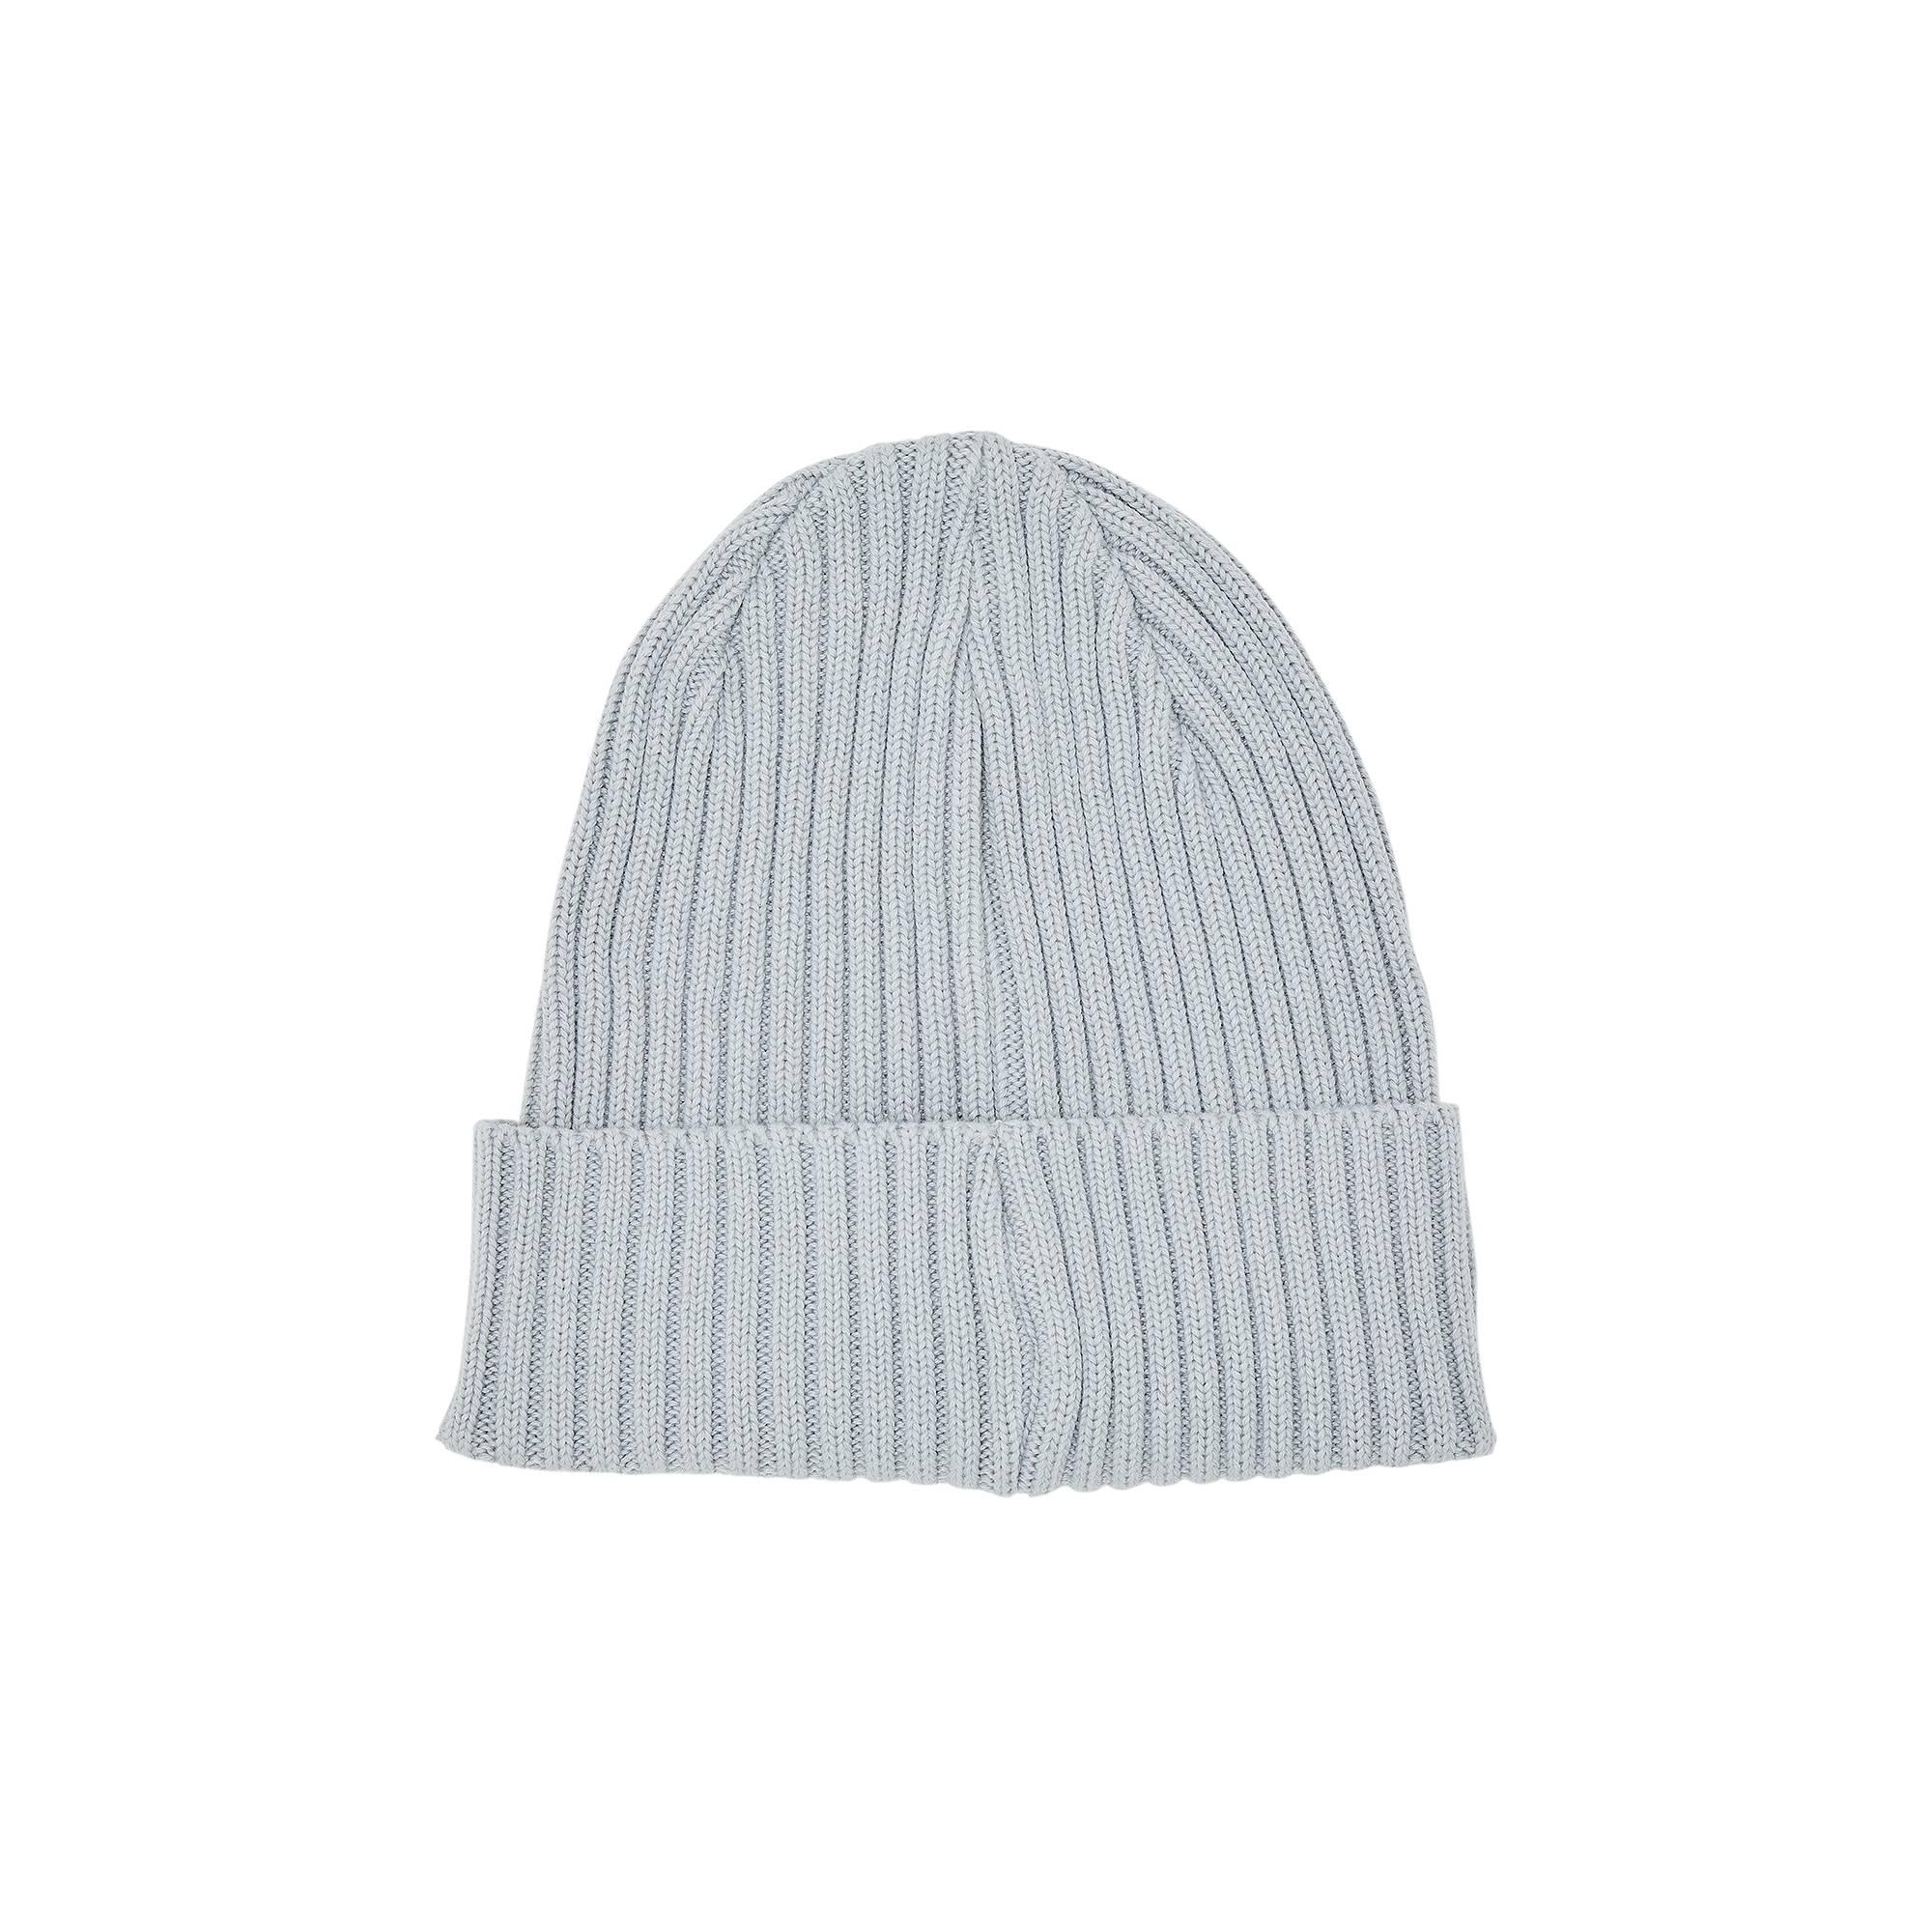 Supreme Overdyed Beanie 'grey' in Gray for Men | Lyst